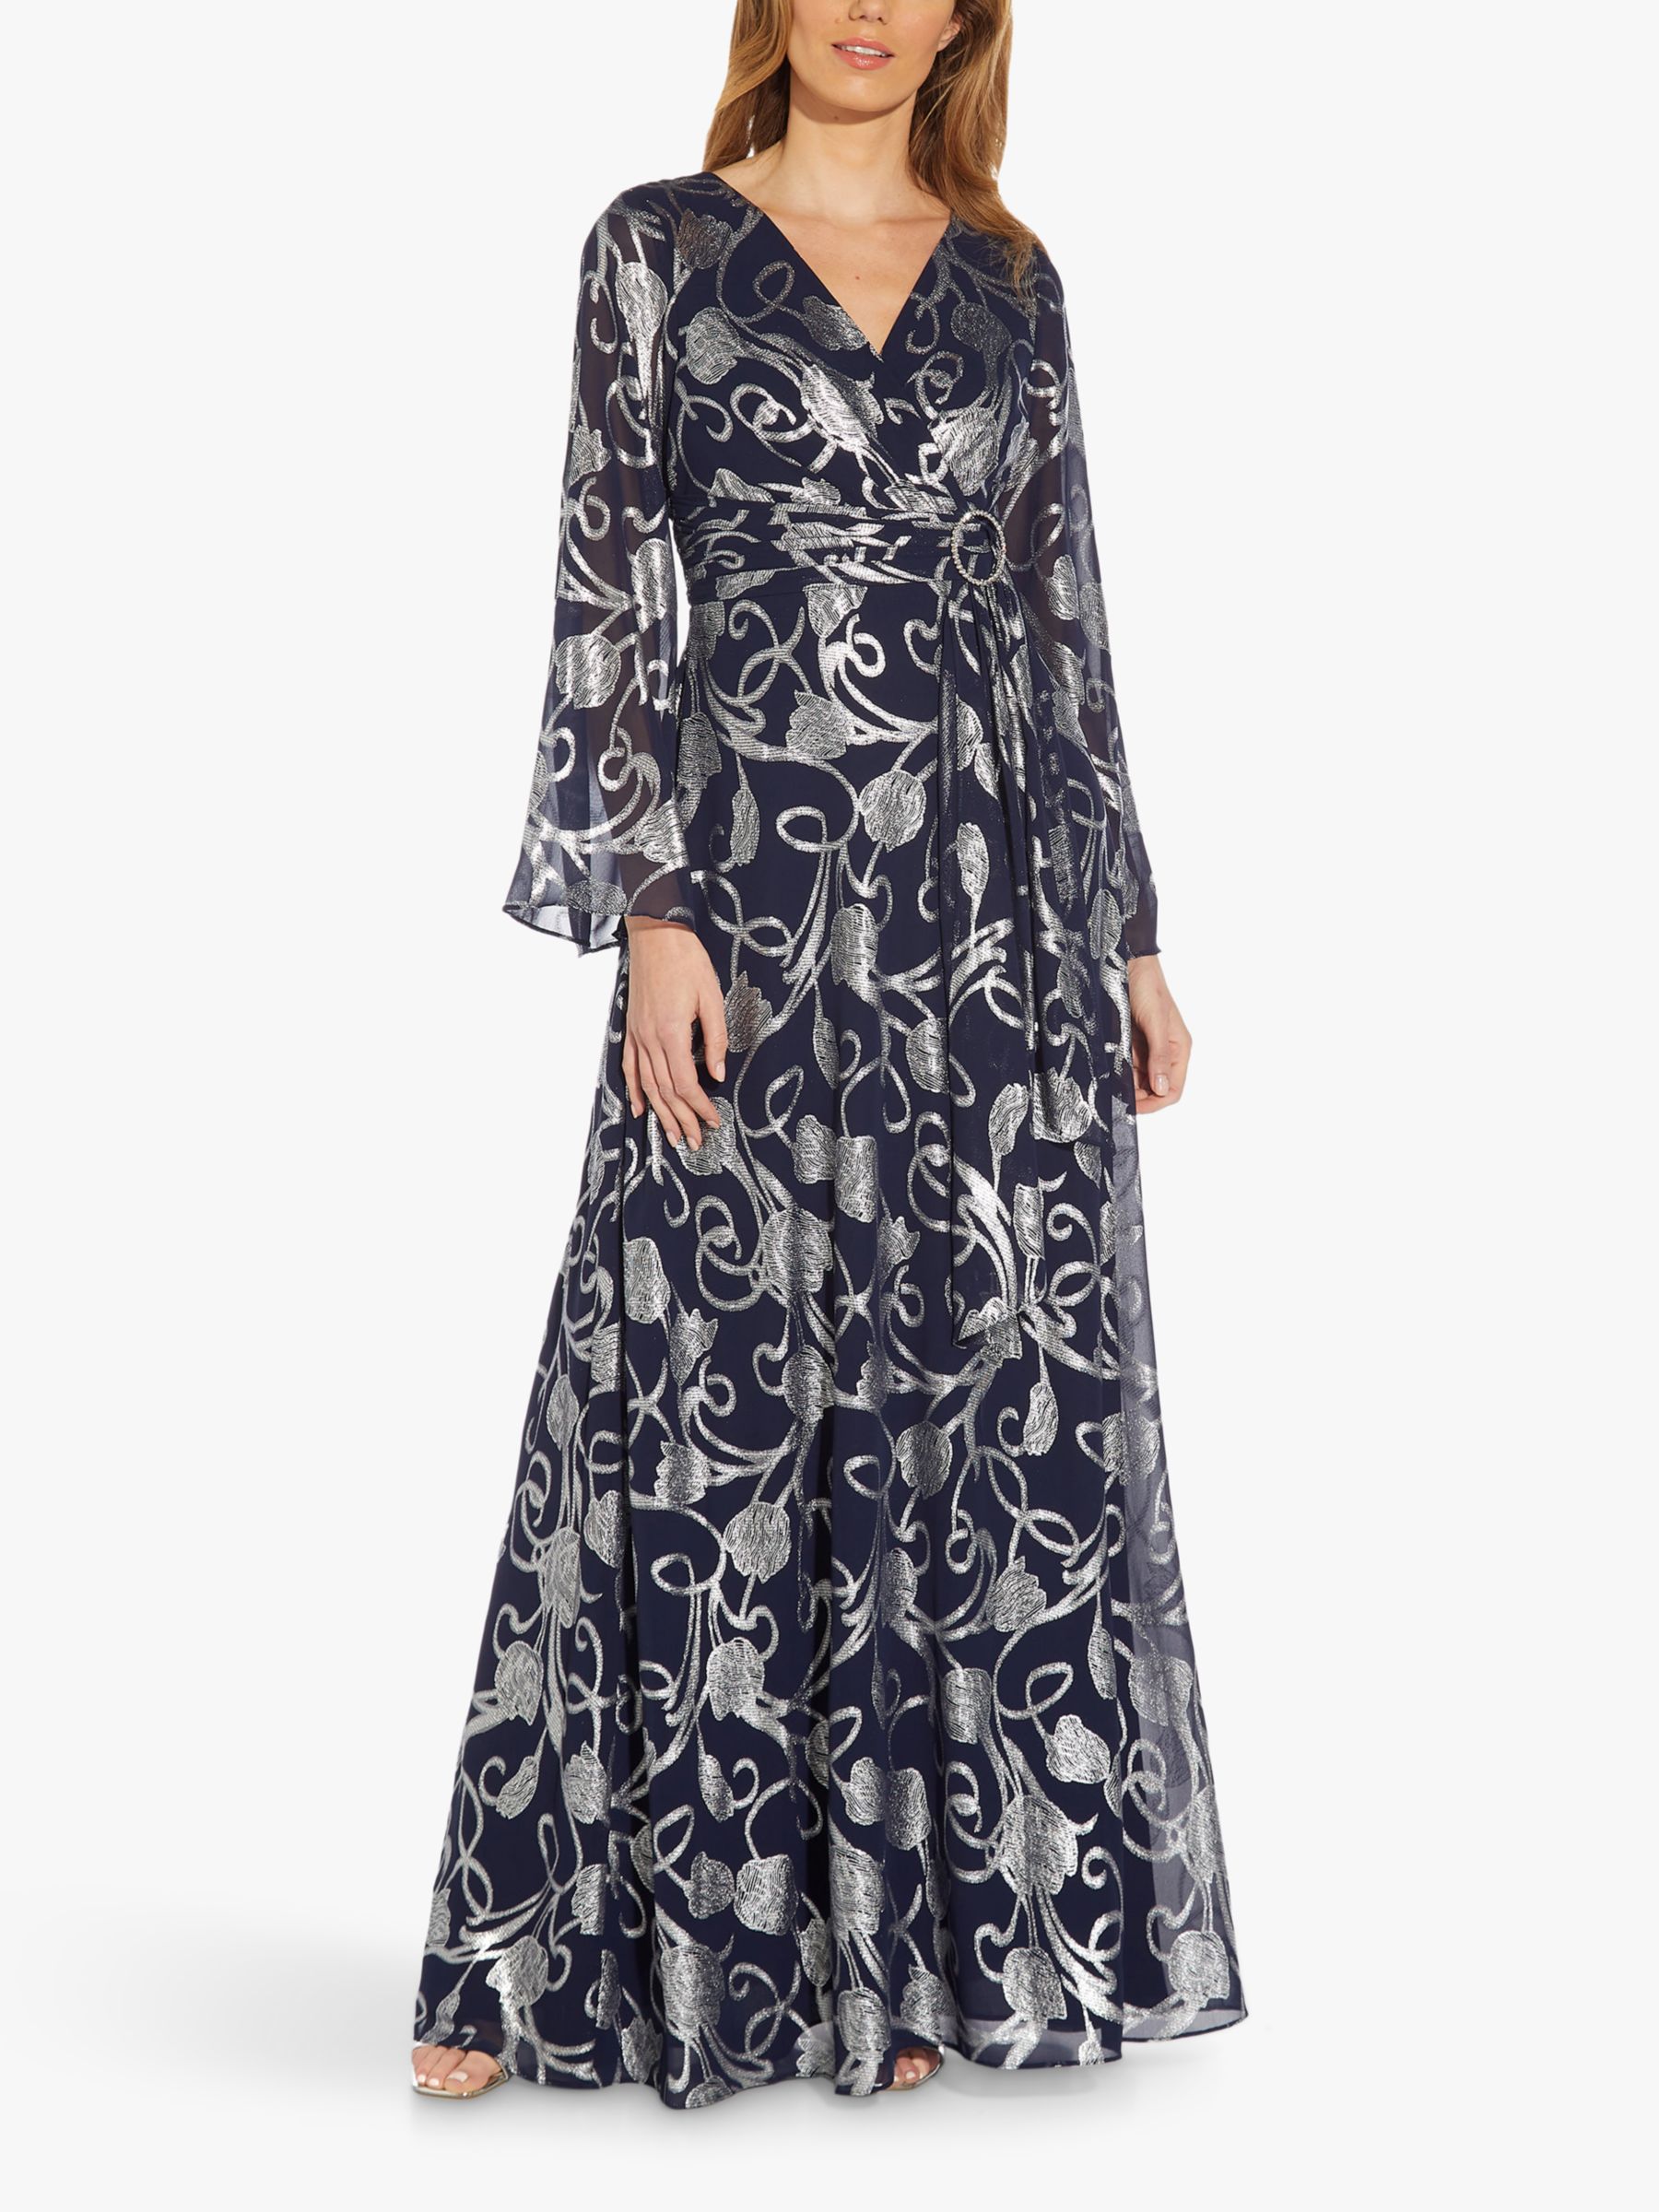 Adrianna Papell Foil Print Floral Chiffon Maxi Dress, Navy/Silver at John  Lewis  Partners